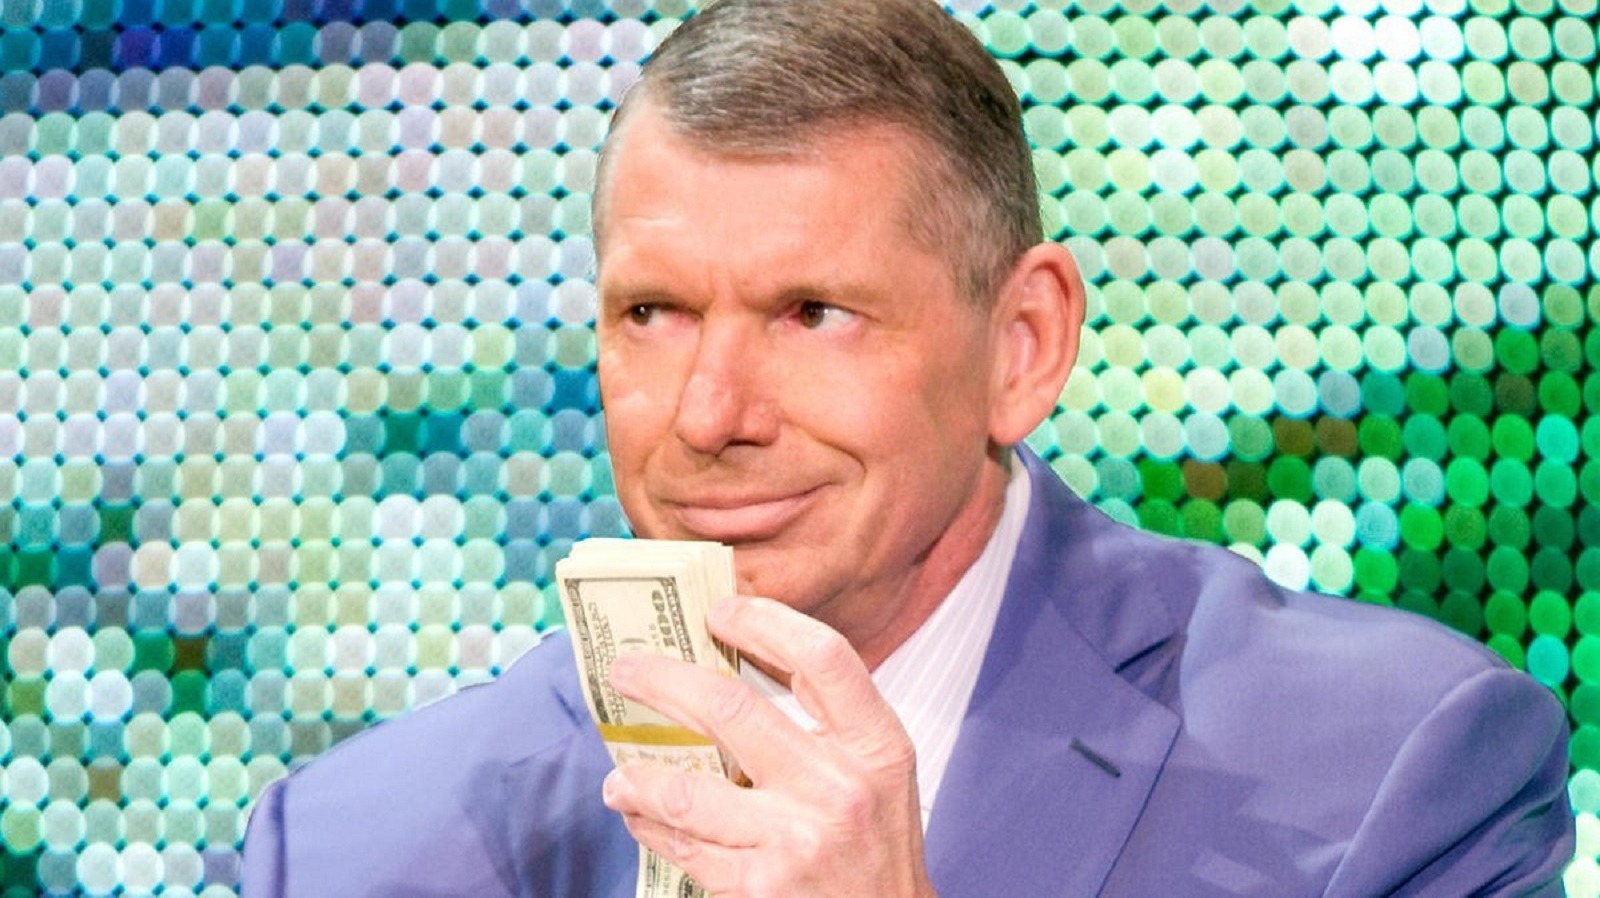 Vince McMahon Sells More Than 5 Million Shares Of TKO Stock Valued Above $400 Million